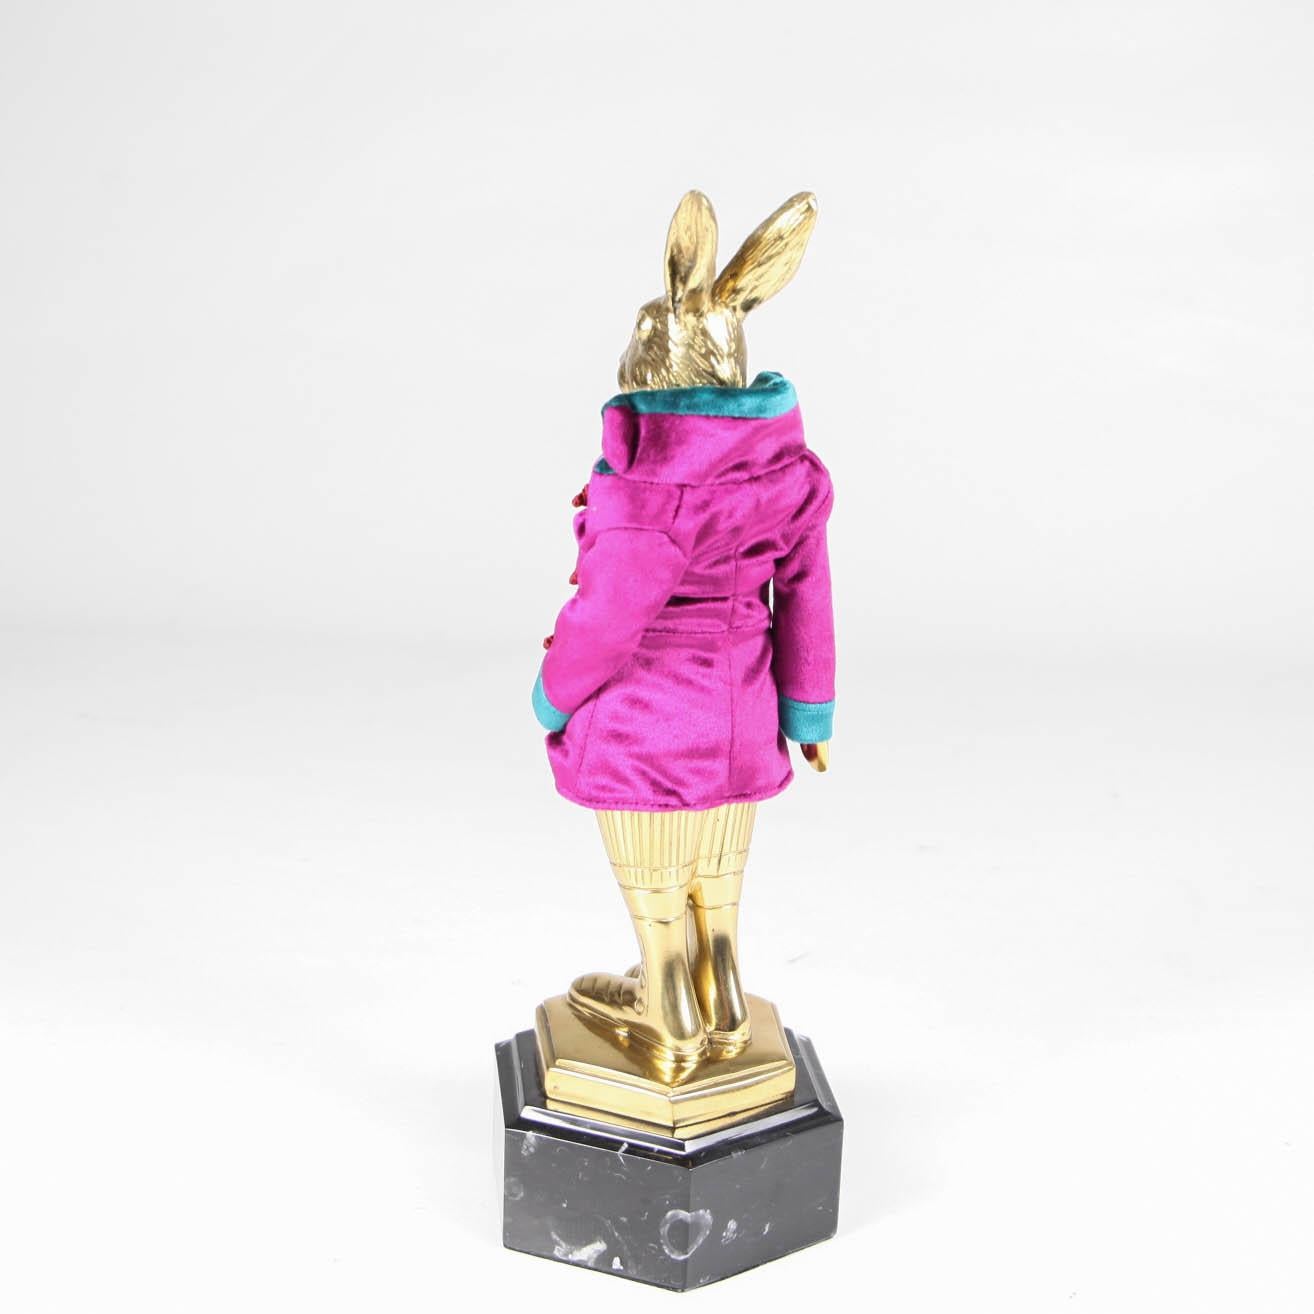 Rabbit brass sculpture with beautiful marble base. Hand made clothes. Great quality and condition.
Corresponding « deer » sculpture for sale here to make a pair..